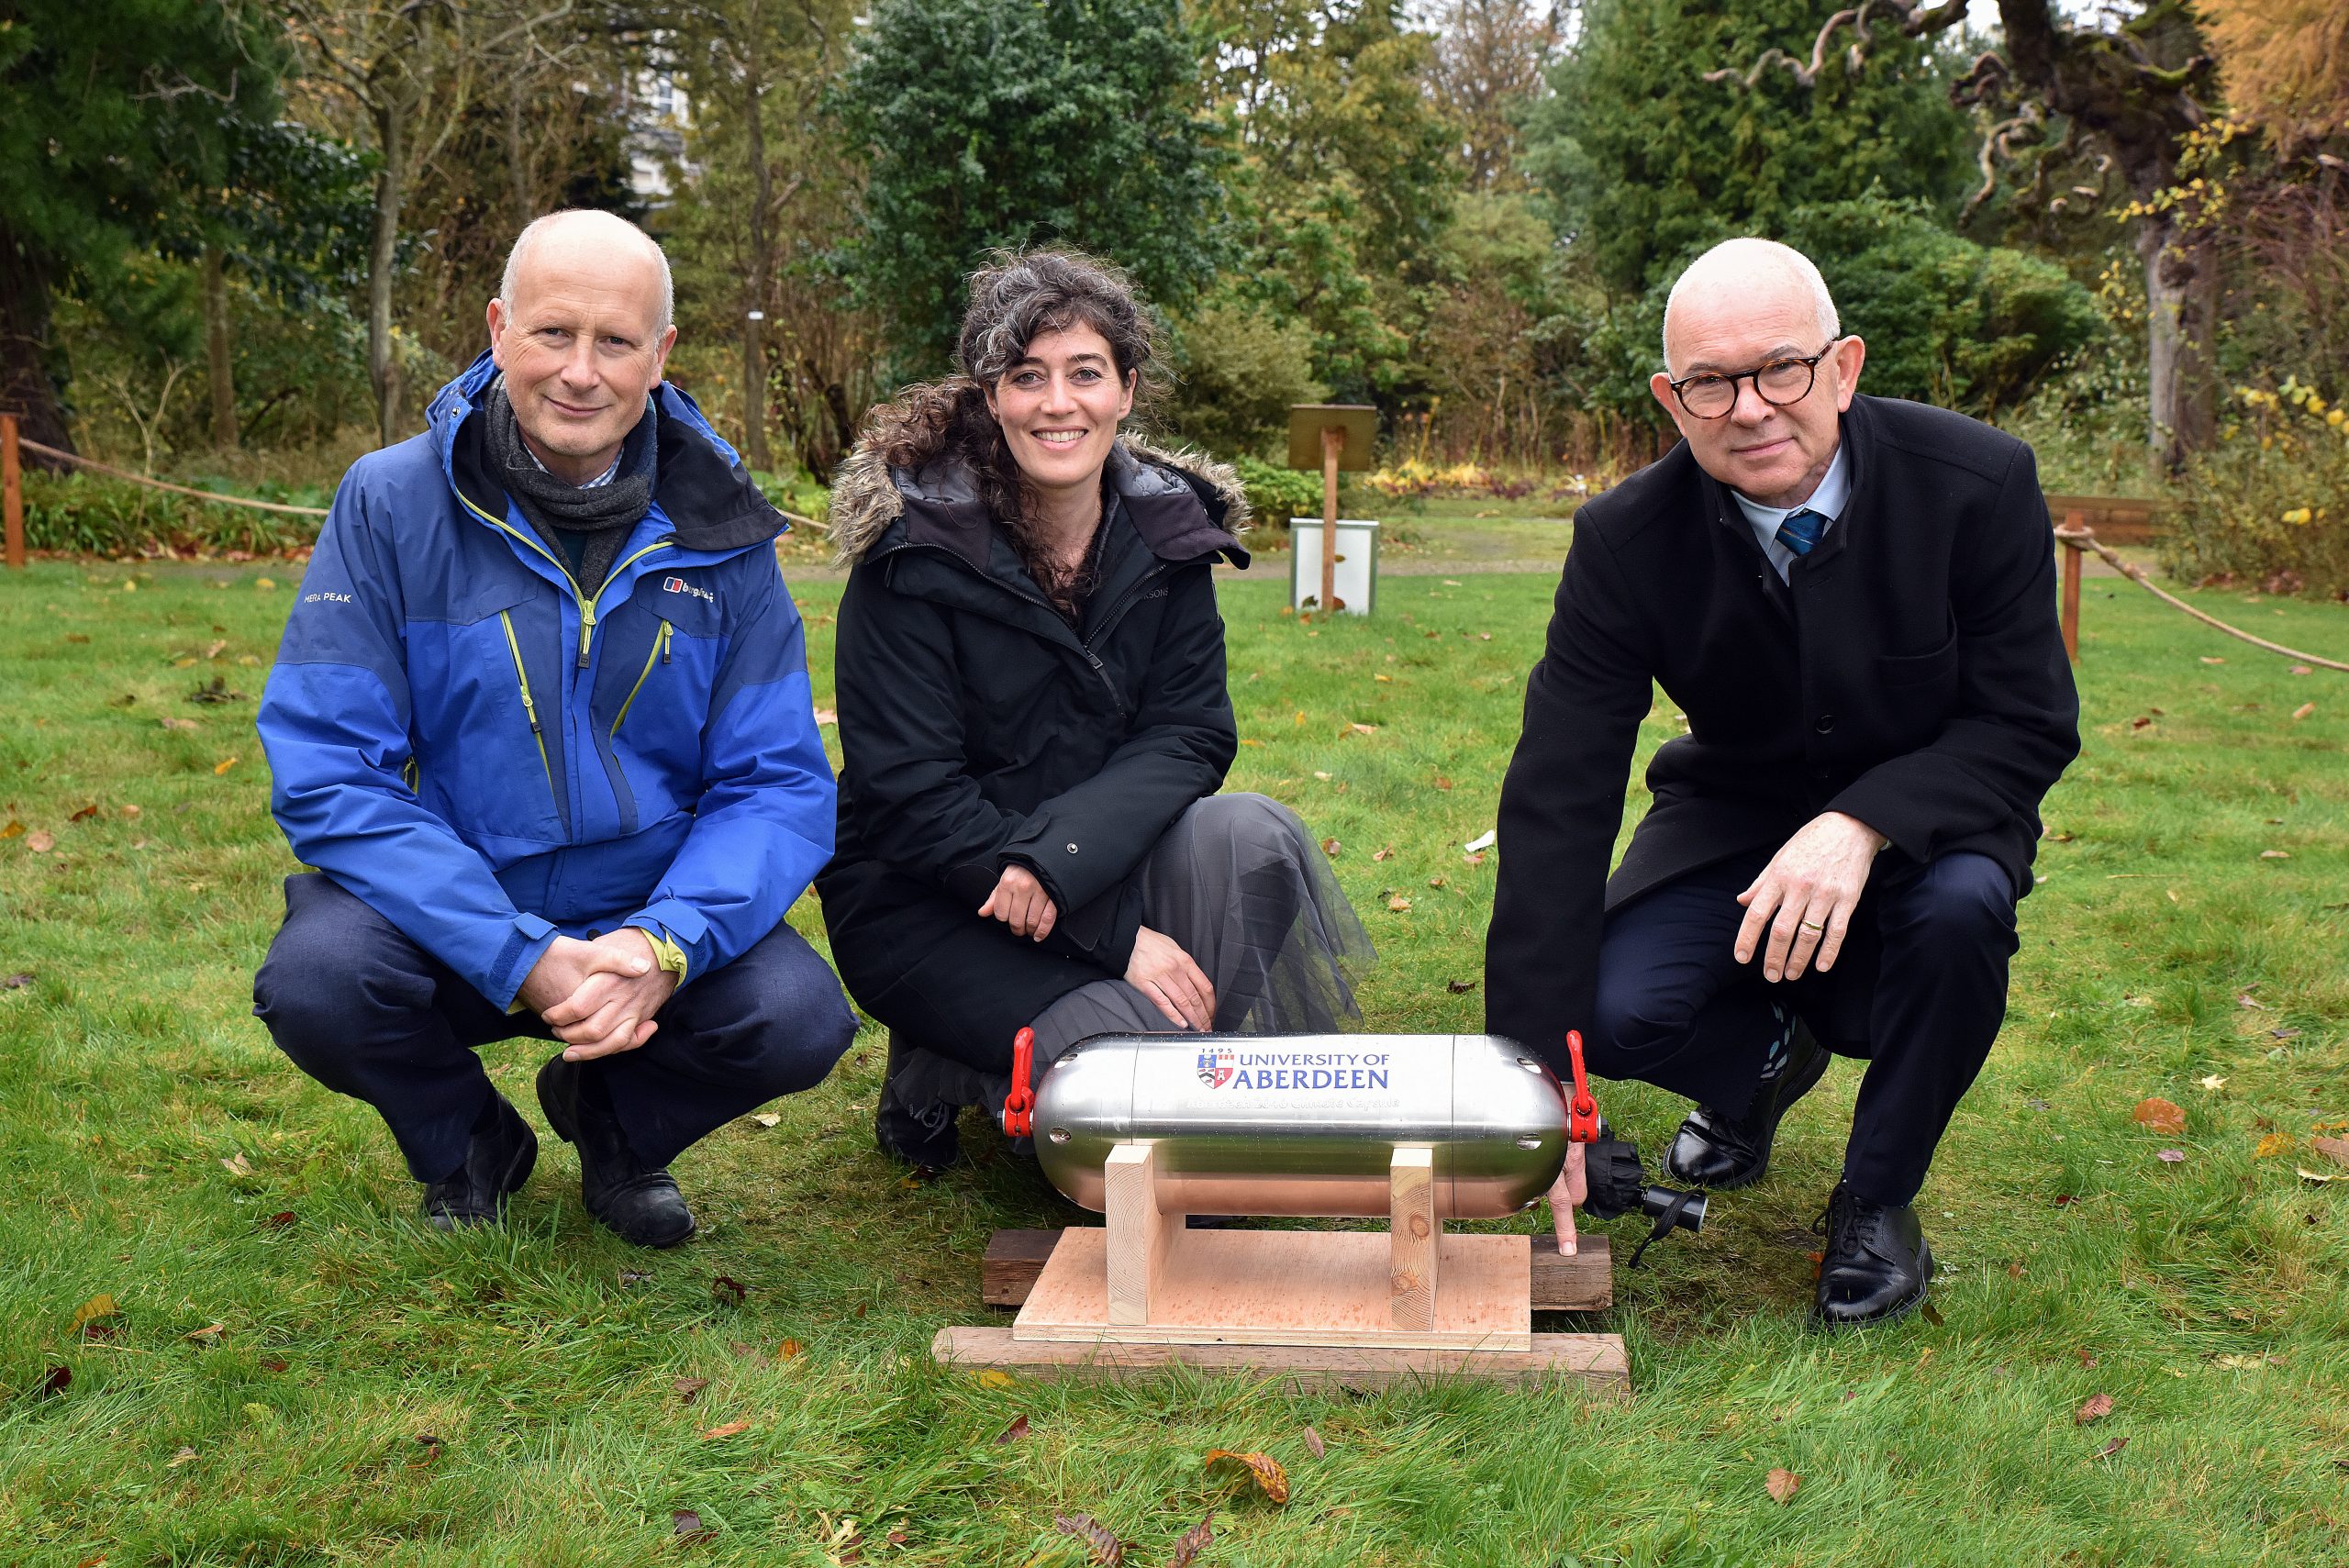 Climate capsule buried in Aberdeen - News